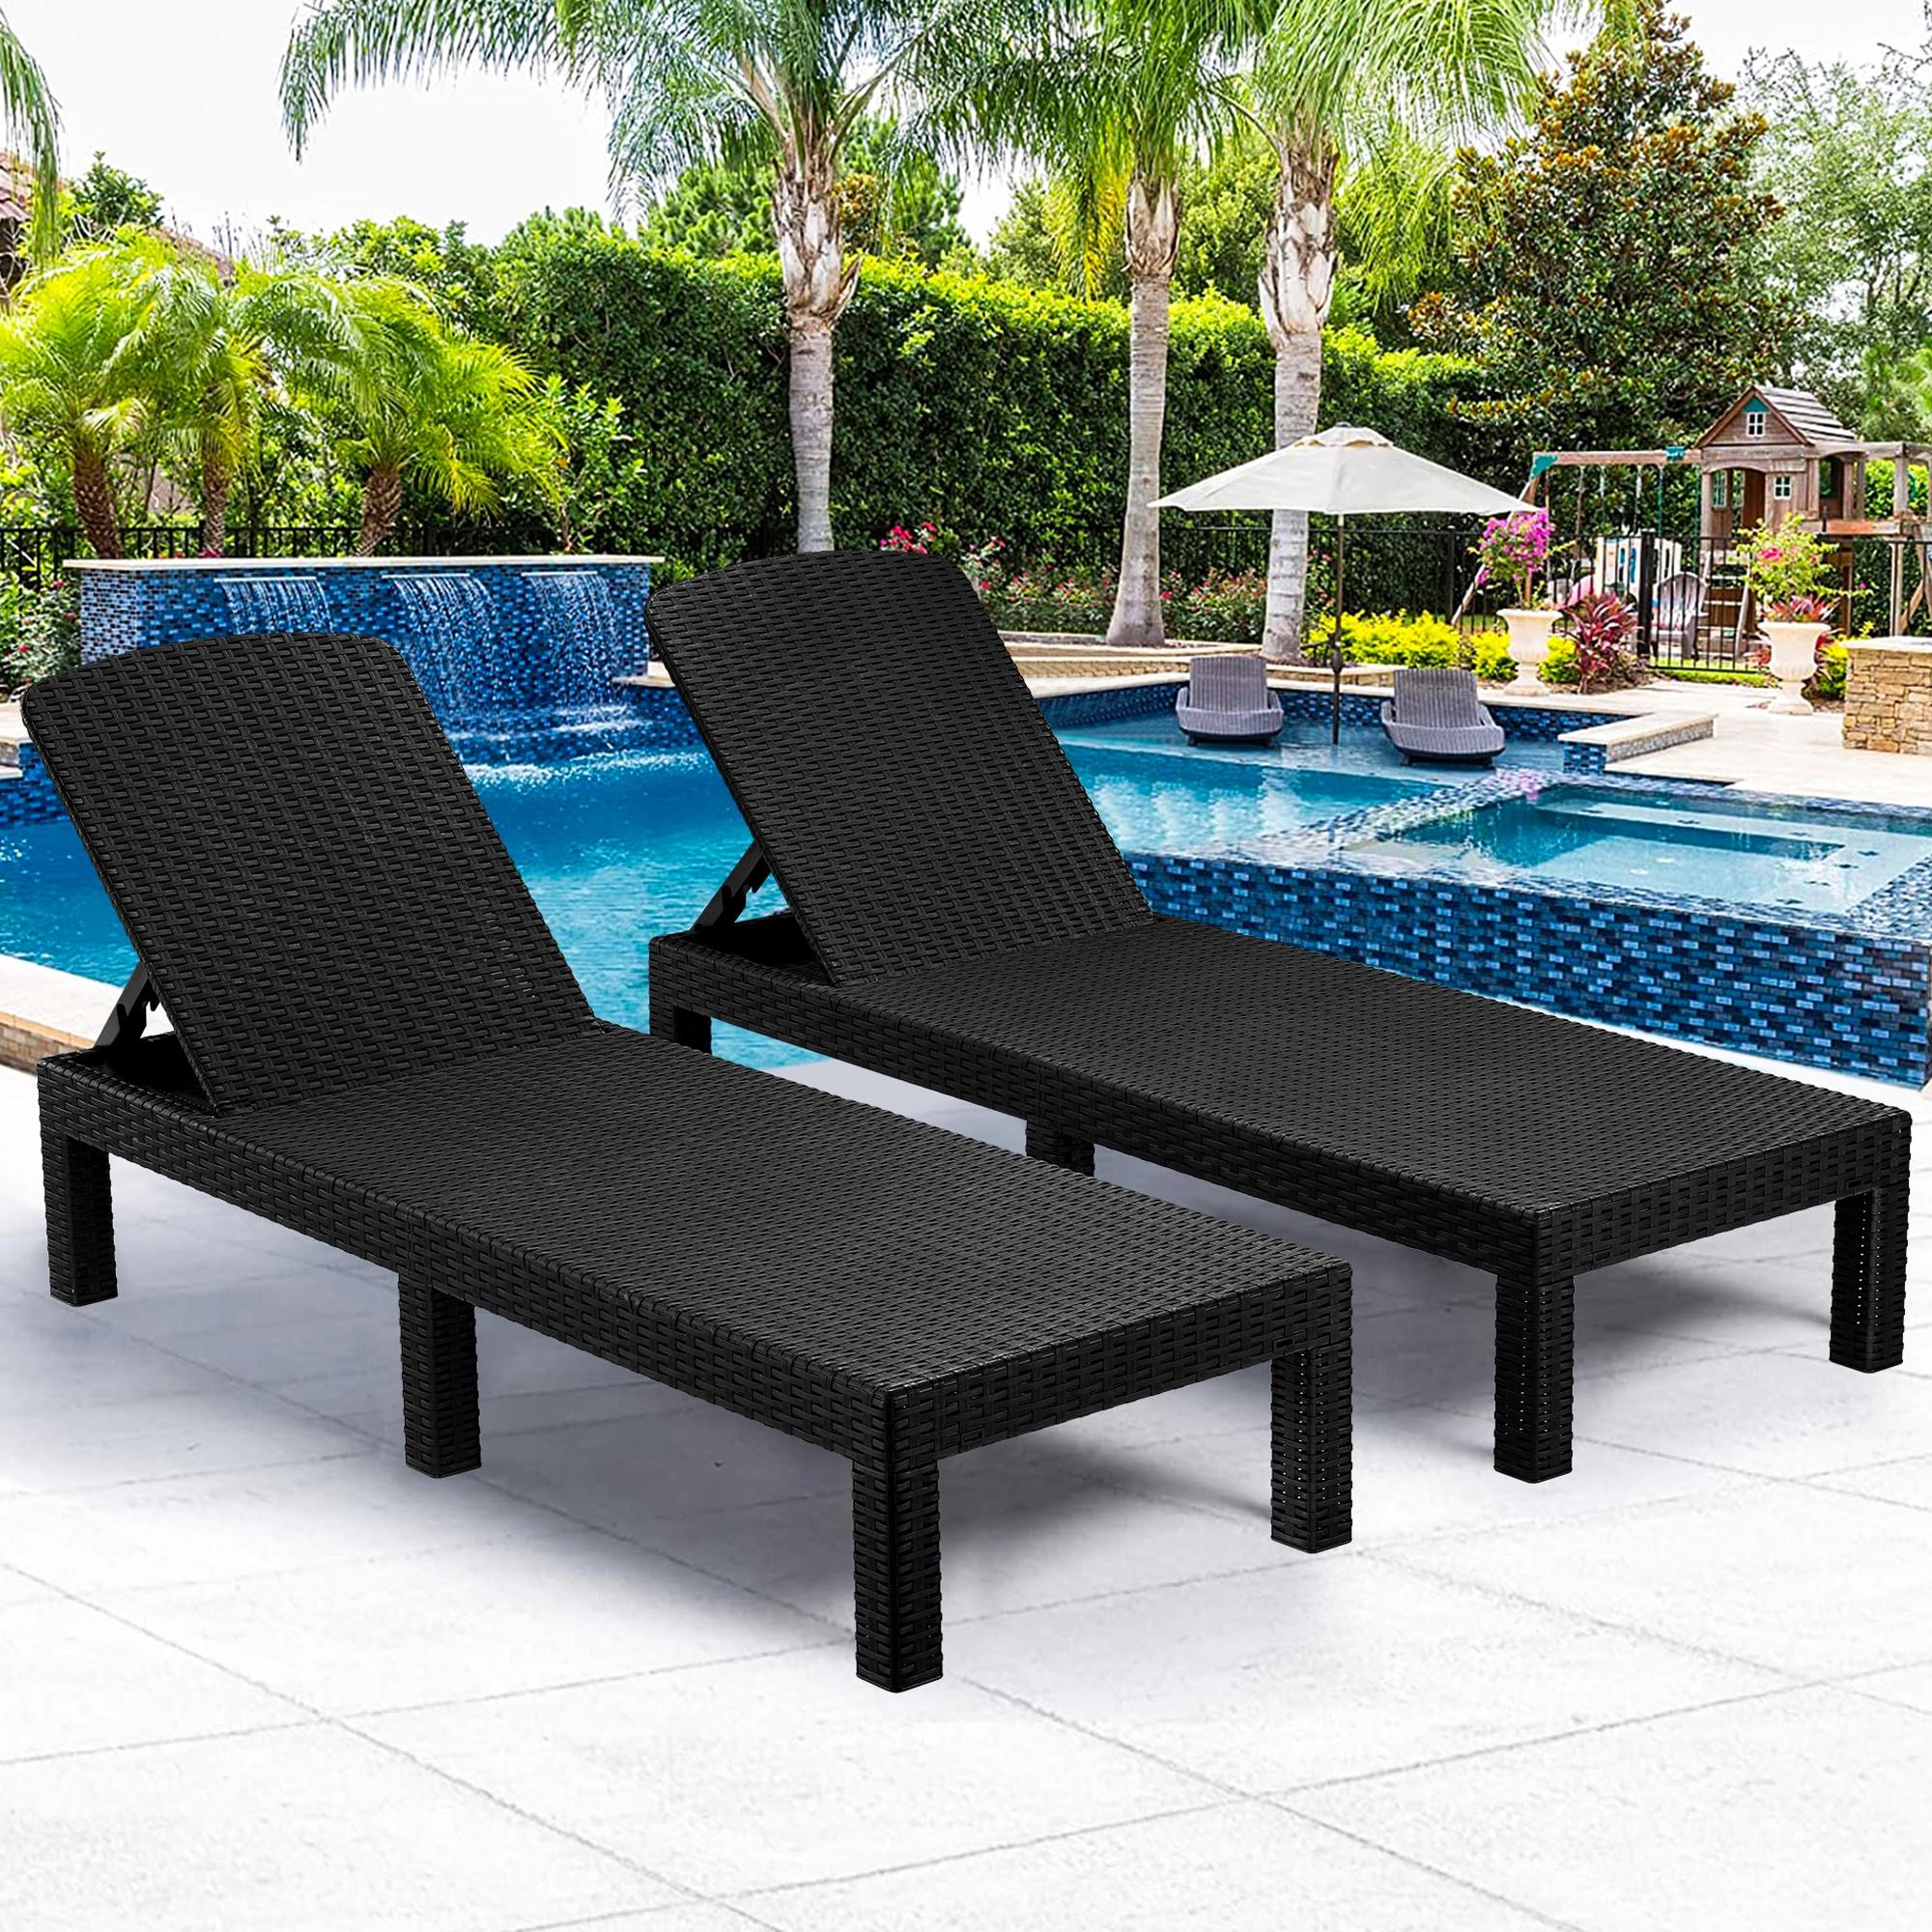 Syngar Chaise Lounge Set of 2, Patio Reclining Lounge Chairs with Adjustable Backrest, Outdoor All-Weather PP Resin Sun Loungers for Backyard, Poolside, Porch, Garden, Black - image 2 of 10